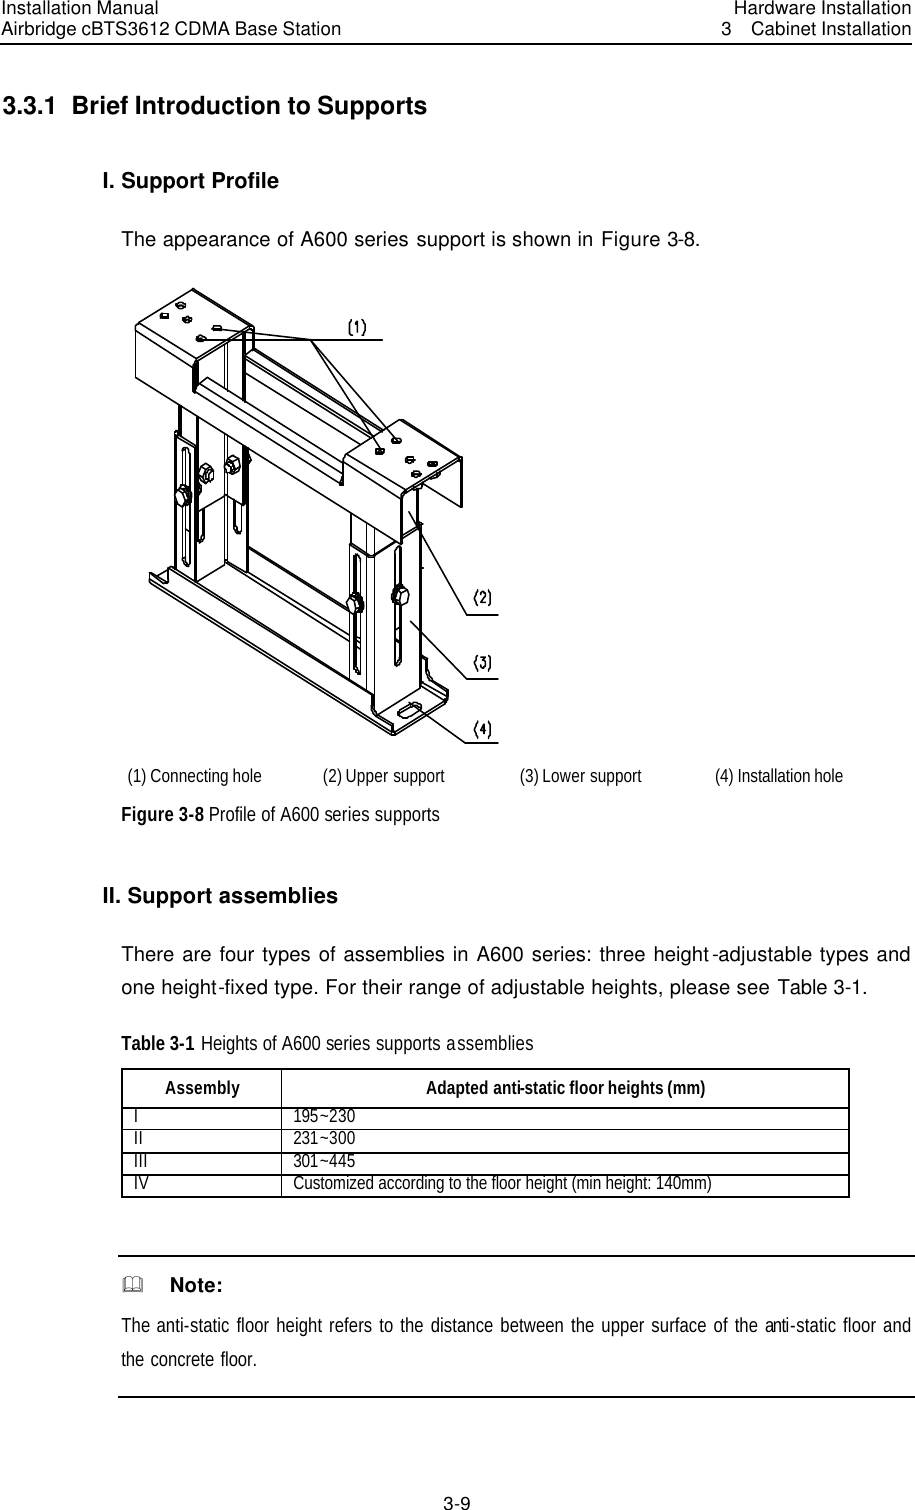 Installation Manual Airbridge cBTS3612 CDMA Base Station Hardware Installation3  Cabinet Installation 3-9　3.3.1  Brief Introduction to Supports I. Support Profile The appearance of A600 series support is shown in Figure 3-8.  (1) Connecting hole (2) Upper support (3) Lower support (4) Installation hole  Figure 3-8 Profile of A600 series supports II. Support assemblies There are four types of assemblies in A600 series: three height-adjustable types and one height-fixed type. For their range of adjustable heights, please see Table 3-1. Table 3-1 Heights of A600 series supports assemblies Assembly Adapted anti-static floor heights (mm) I 195~230 II 231~300 III 301~445 IV Customized according to the floor height (min height: 140mm)   &amp;  Note: The anti-static floor height refers to the distance between the upper surface of the anti-static floor and the concrete floor.  